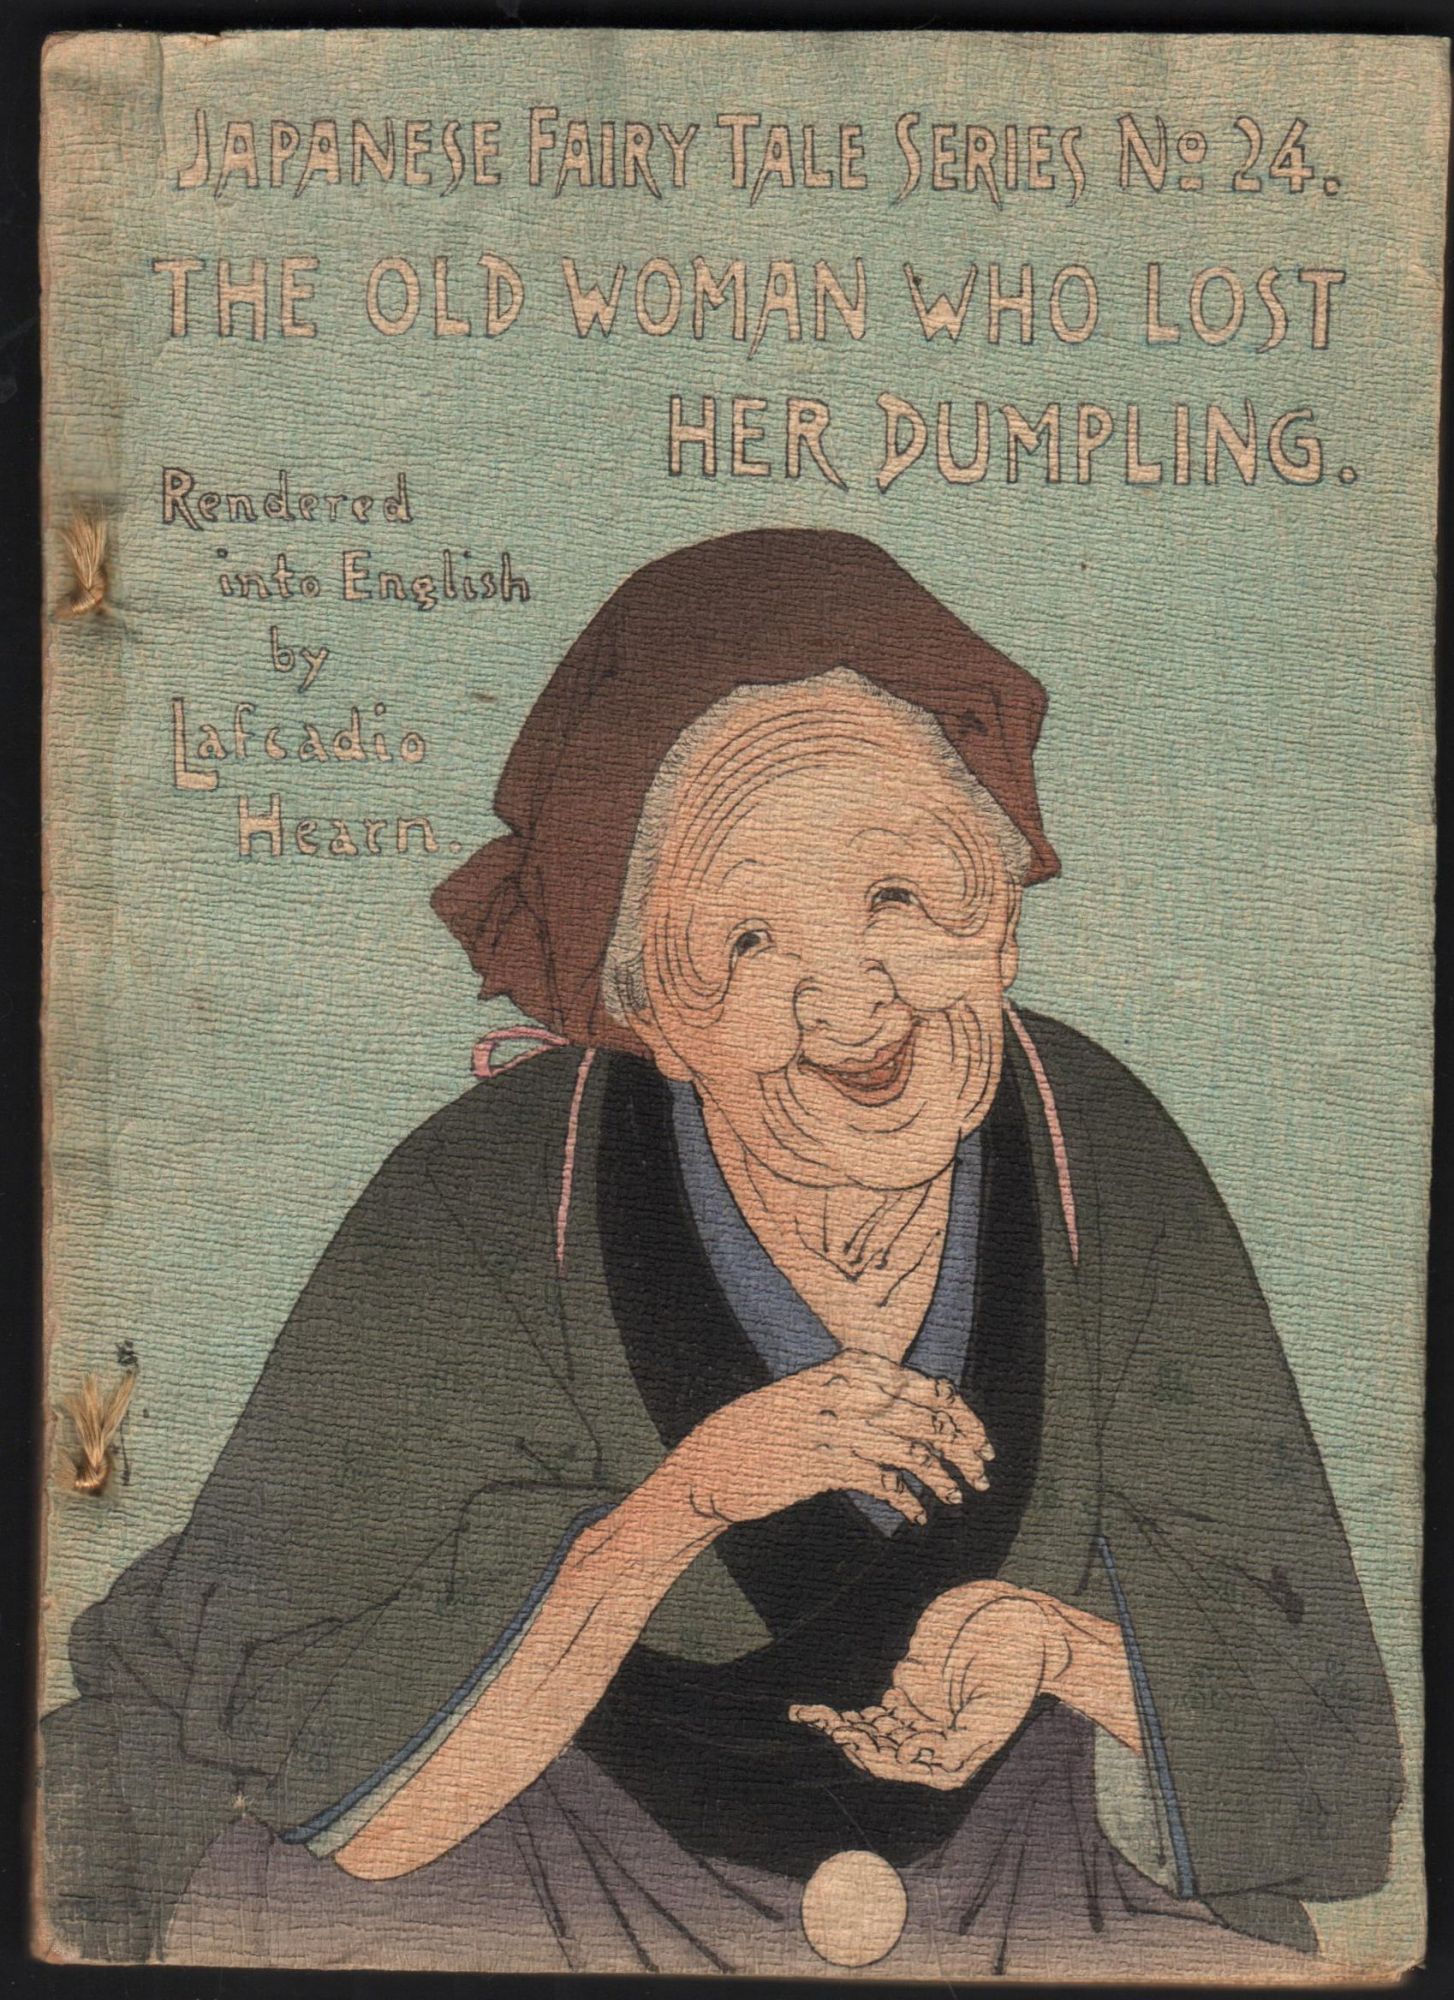 The Old Woman Who Lost Her Dumpling. Japanese Fairy Tales Series